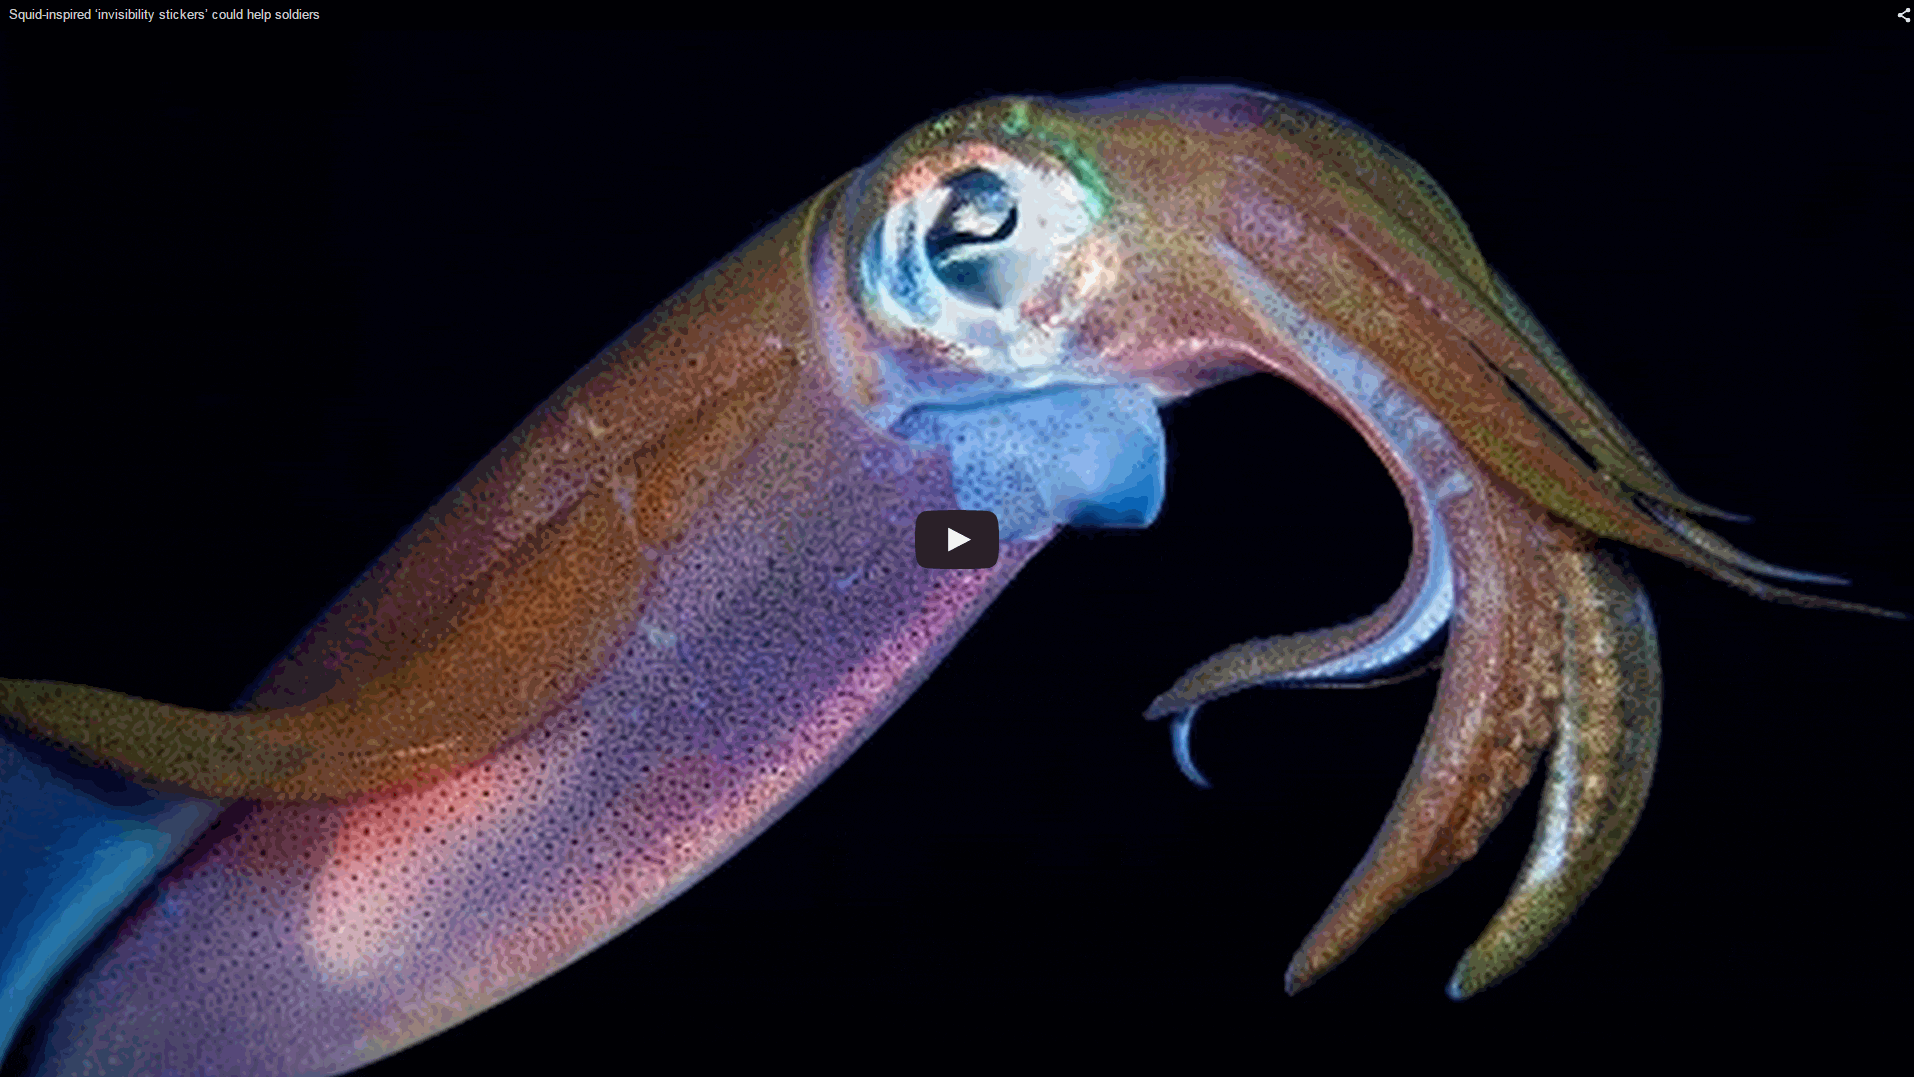 Squid-Inspired ‘Invisibility Stickers’ Could Help Soldiers Evade Detection in the Dark